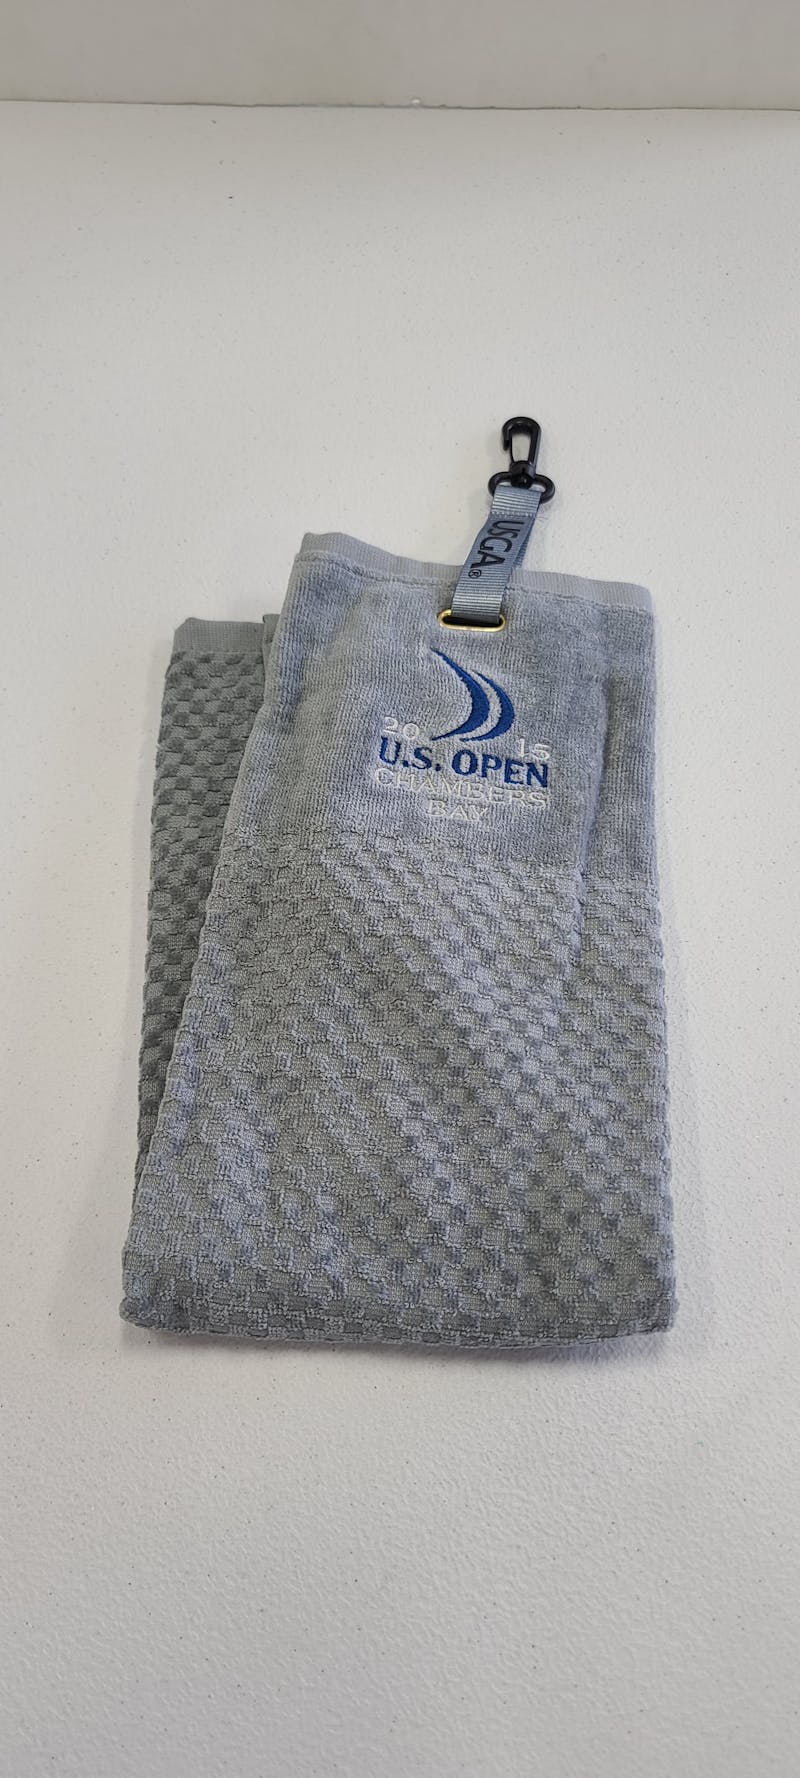 Used 2015 US OPEN GOLF TOWEL Golf / Accessories Golf / Accessories